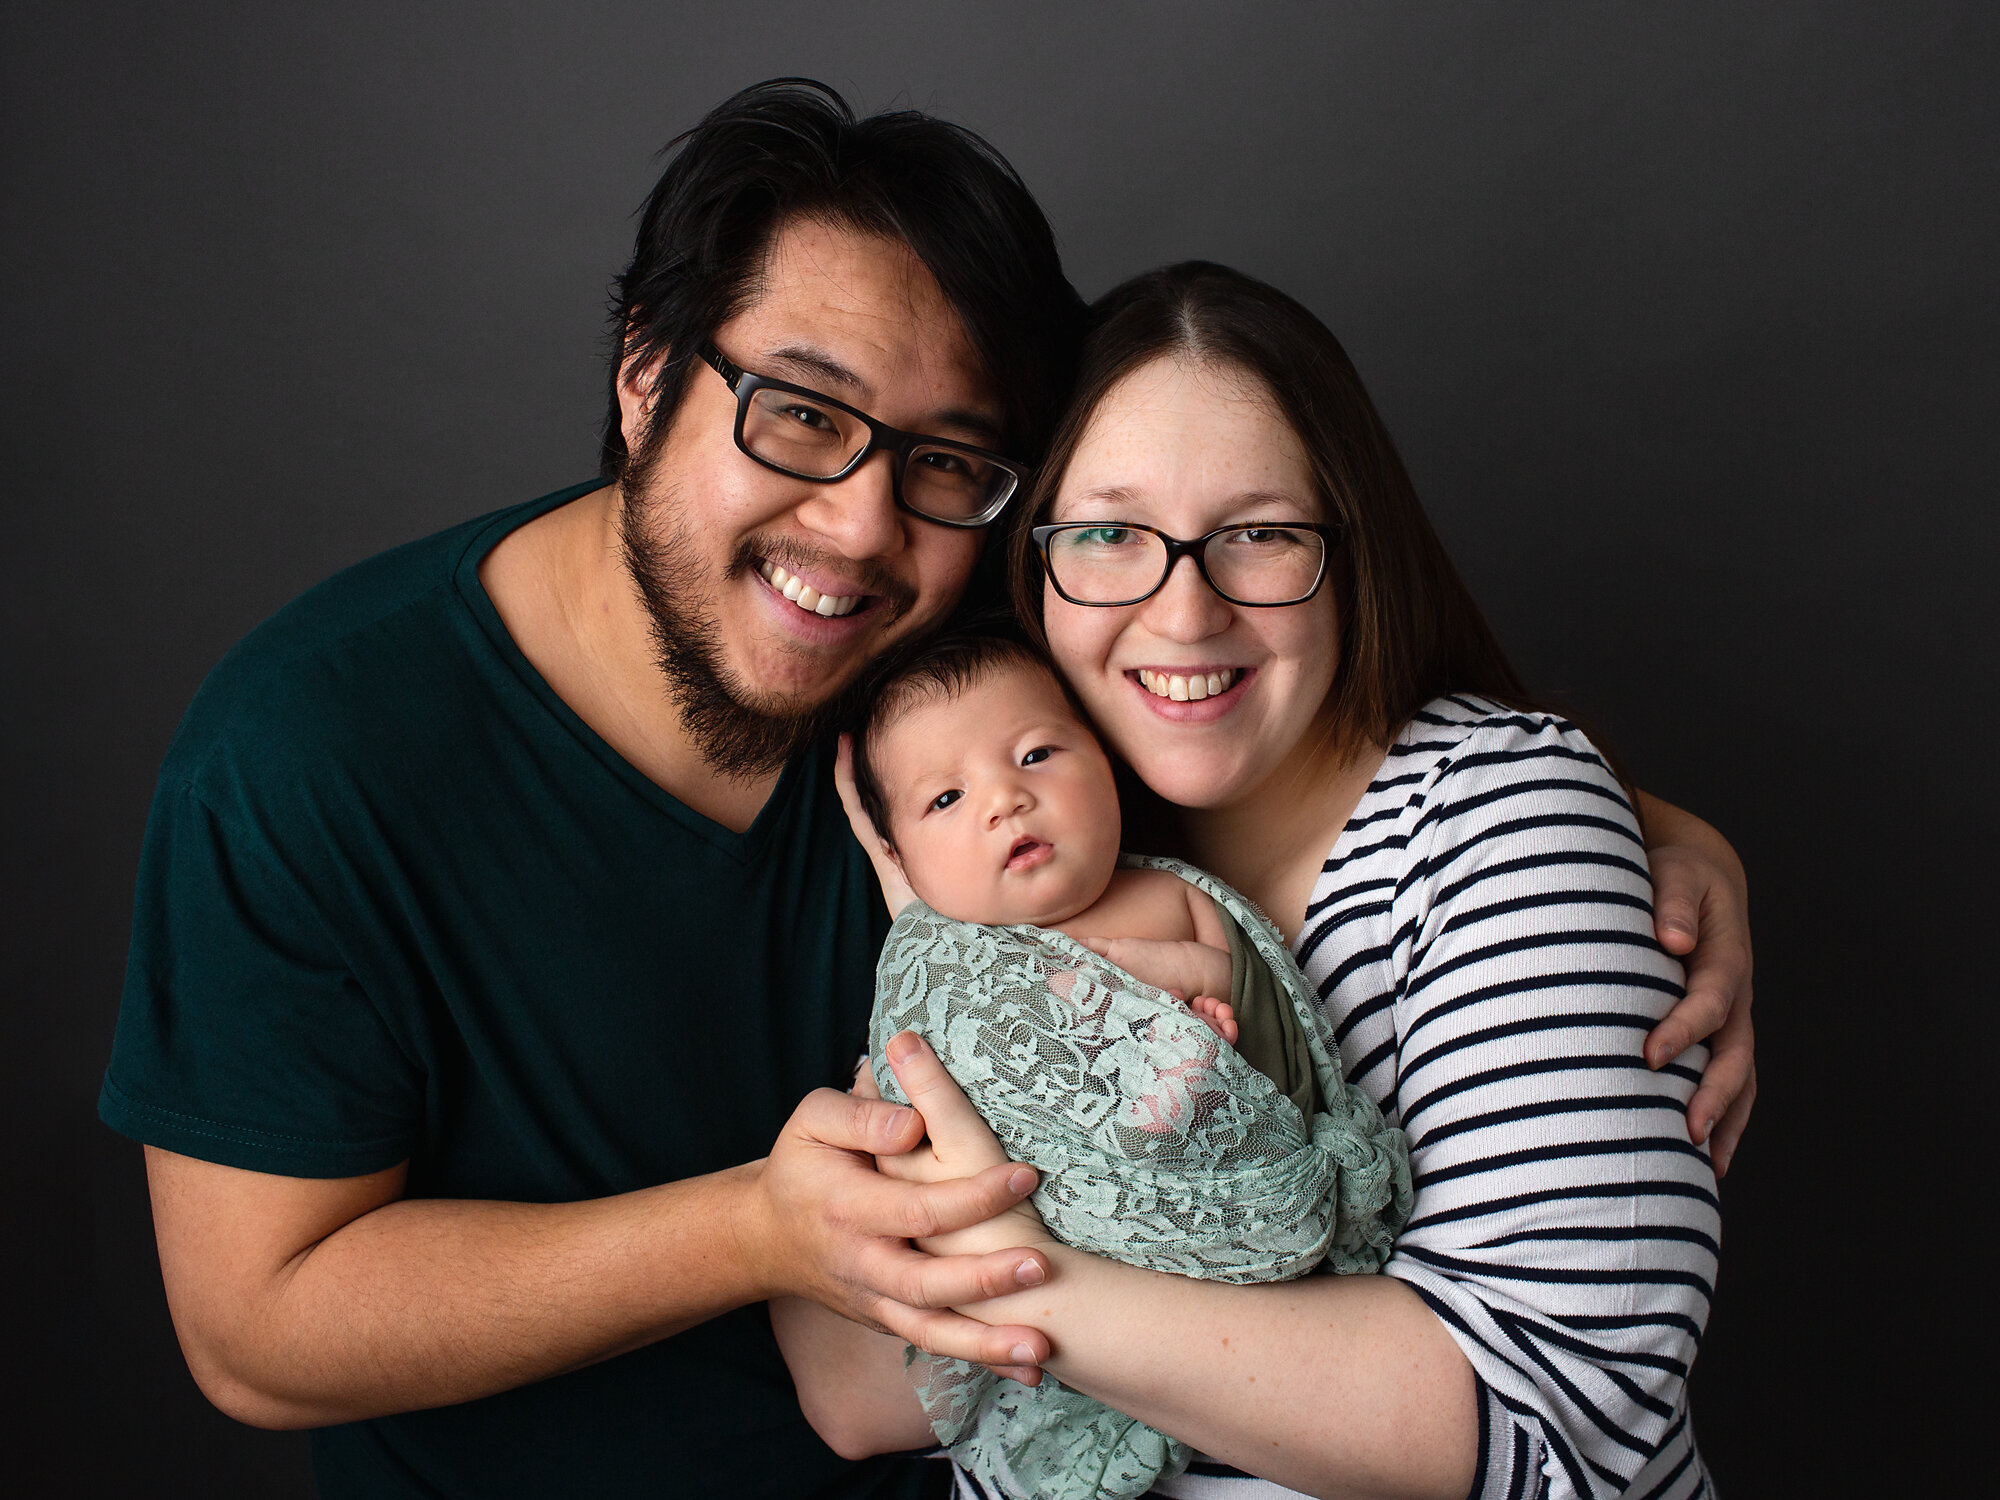 family newborn photographer, south wales, caerphilly, cardiff